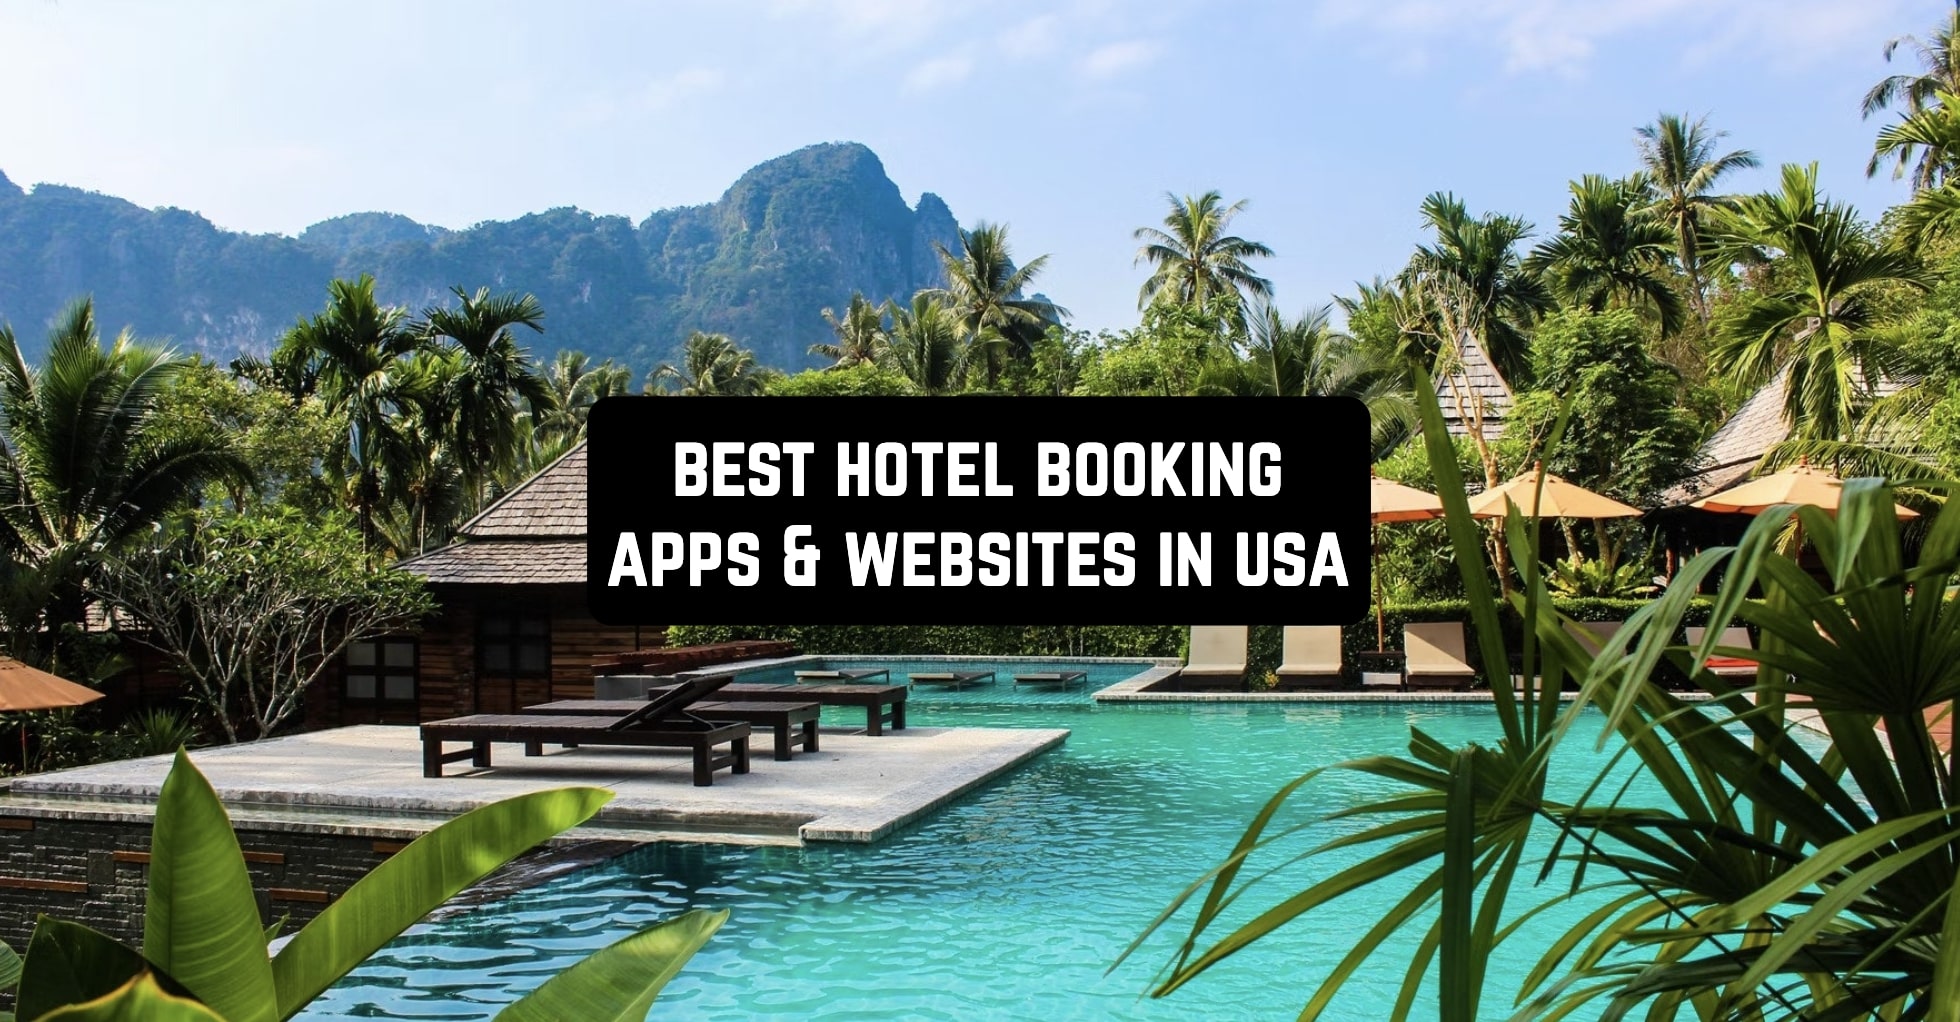 Best-Hotel-Booking-Apps-Websites-in-USA